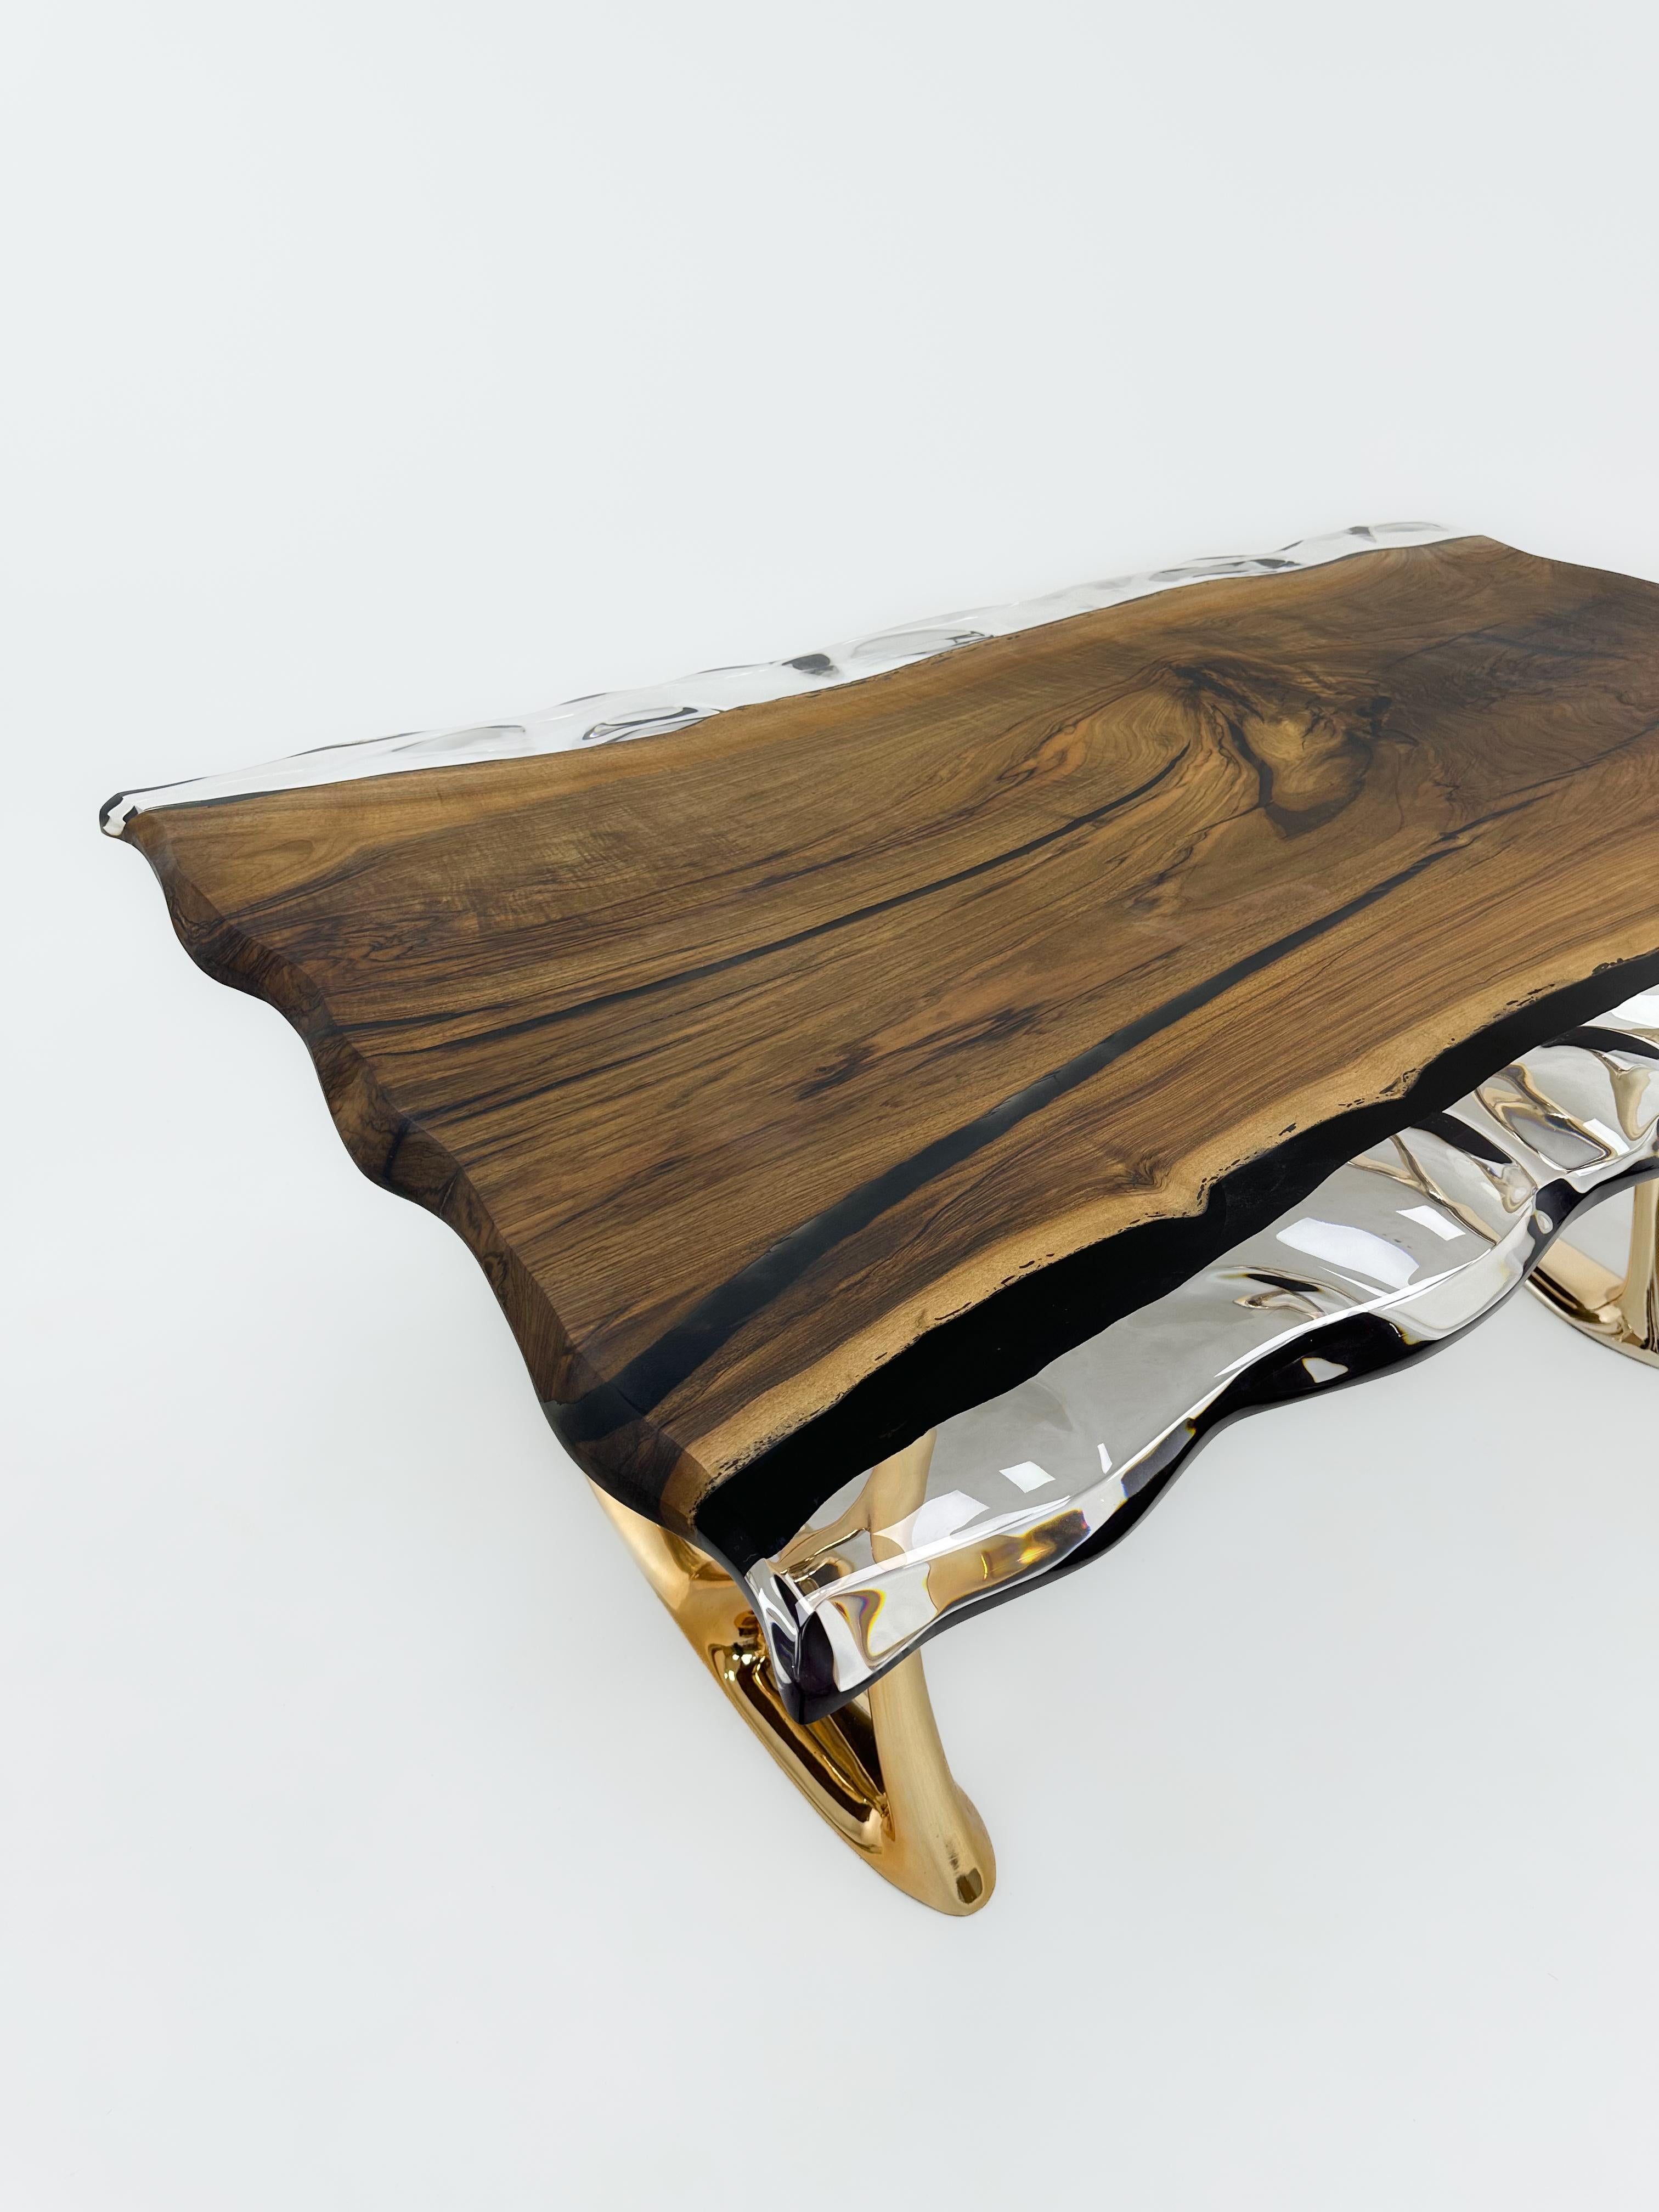 Custom Clear Epoxy Resin Walnut Wood Dining Table - Natural Wood Table (Türkisch) im Angebot